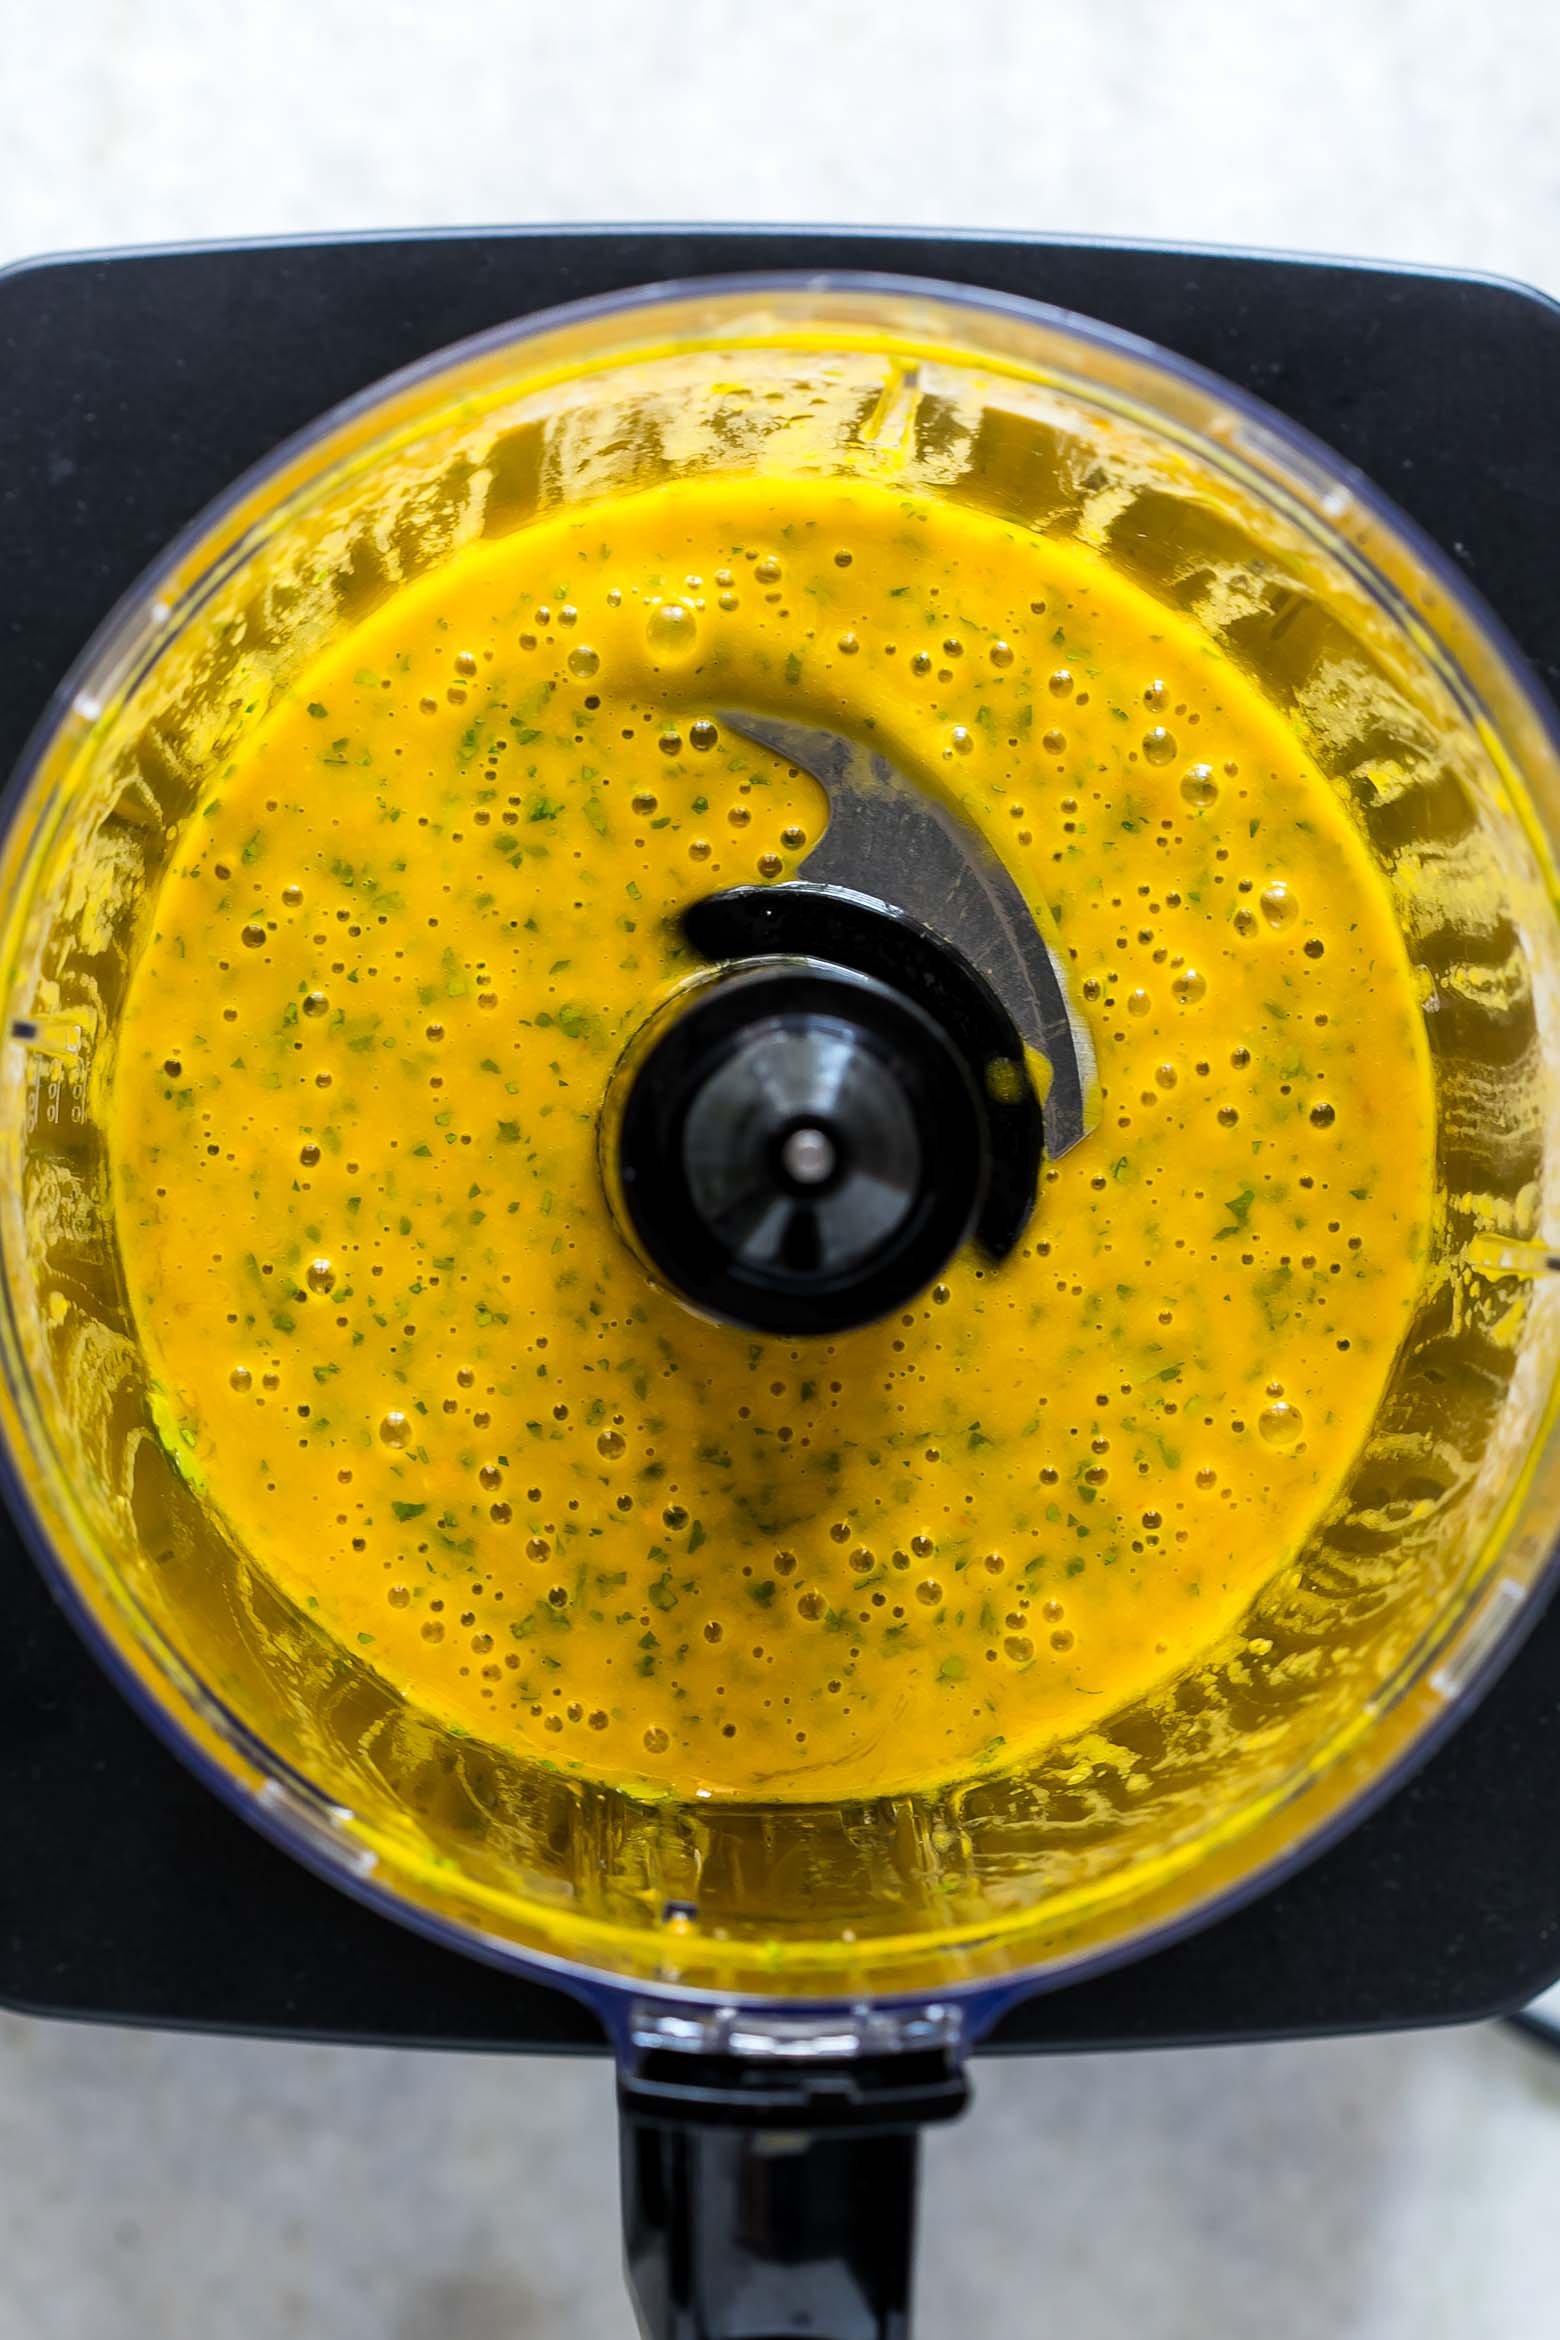 Mango Cilantro Salad Dressing is a fresh, tropical, creamy dressing that's super healthy, easily made in a blender and is gluten free. You'll want to pour it on everything!